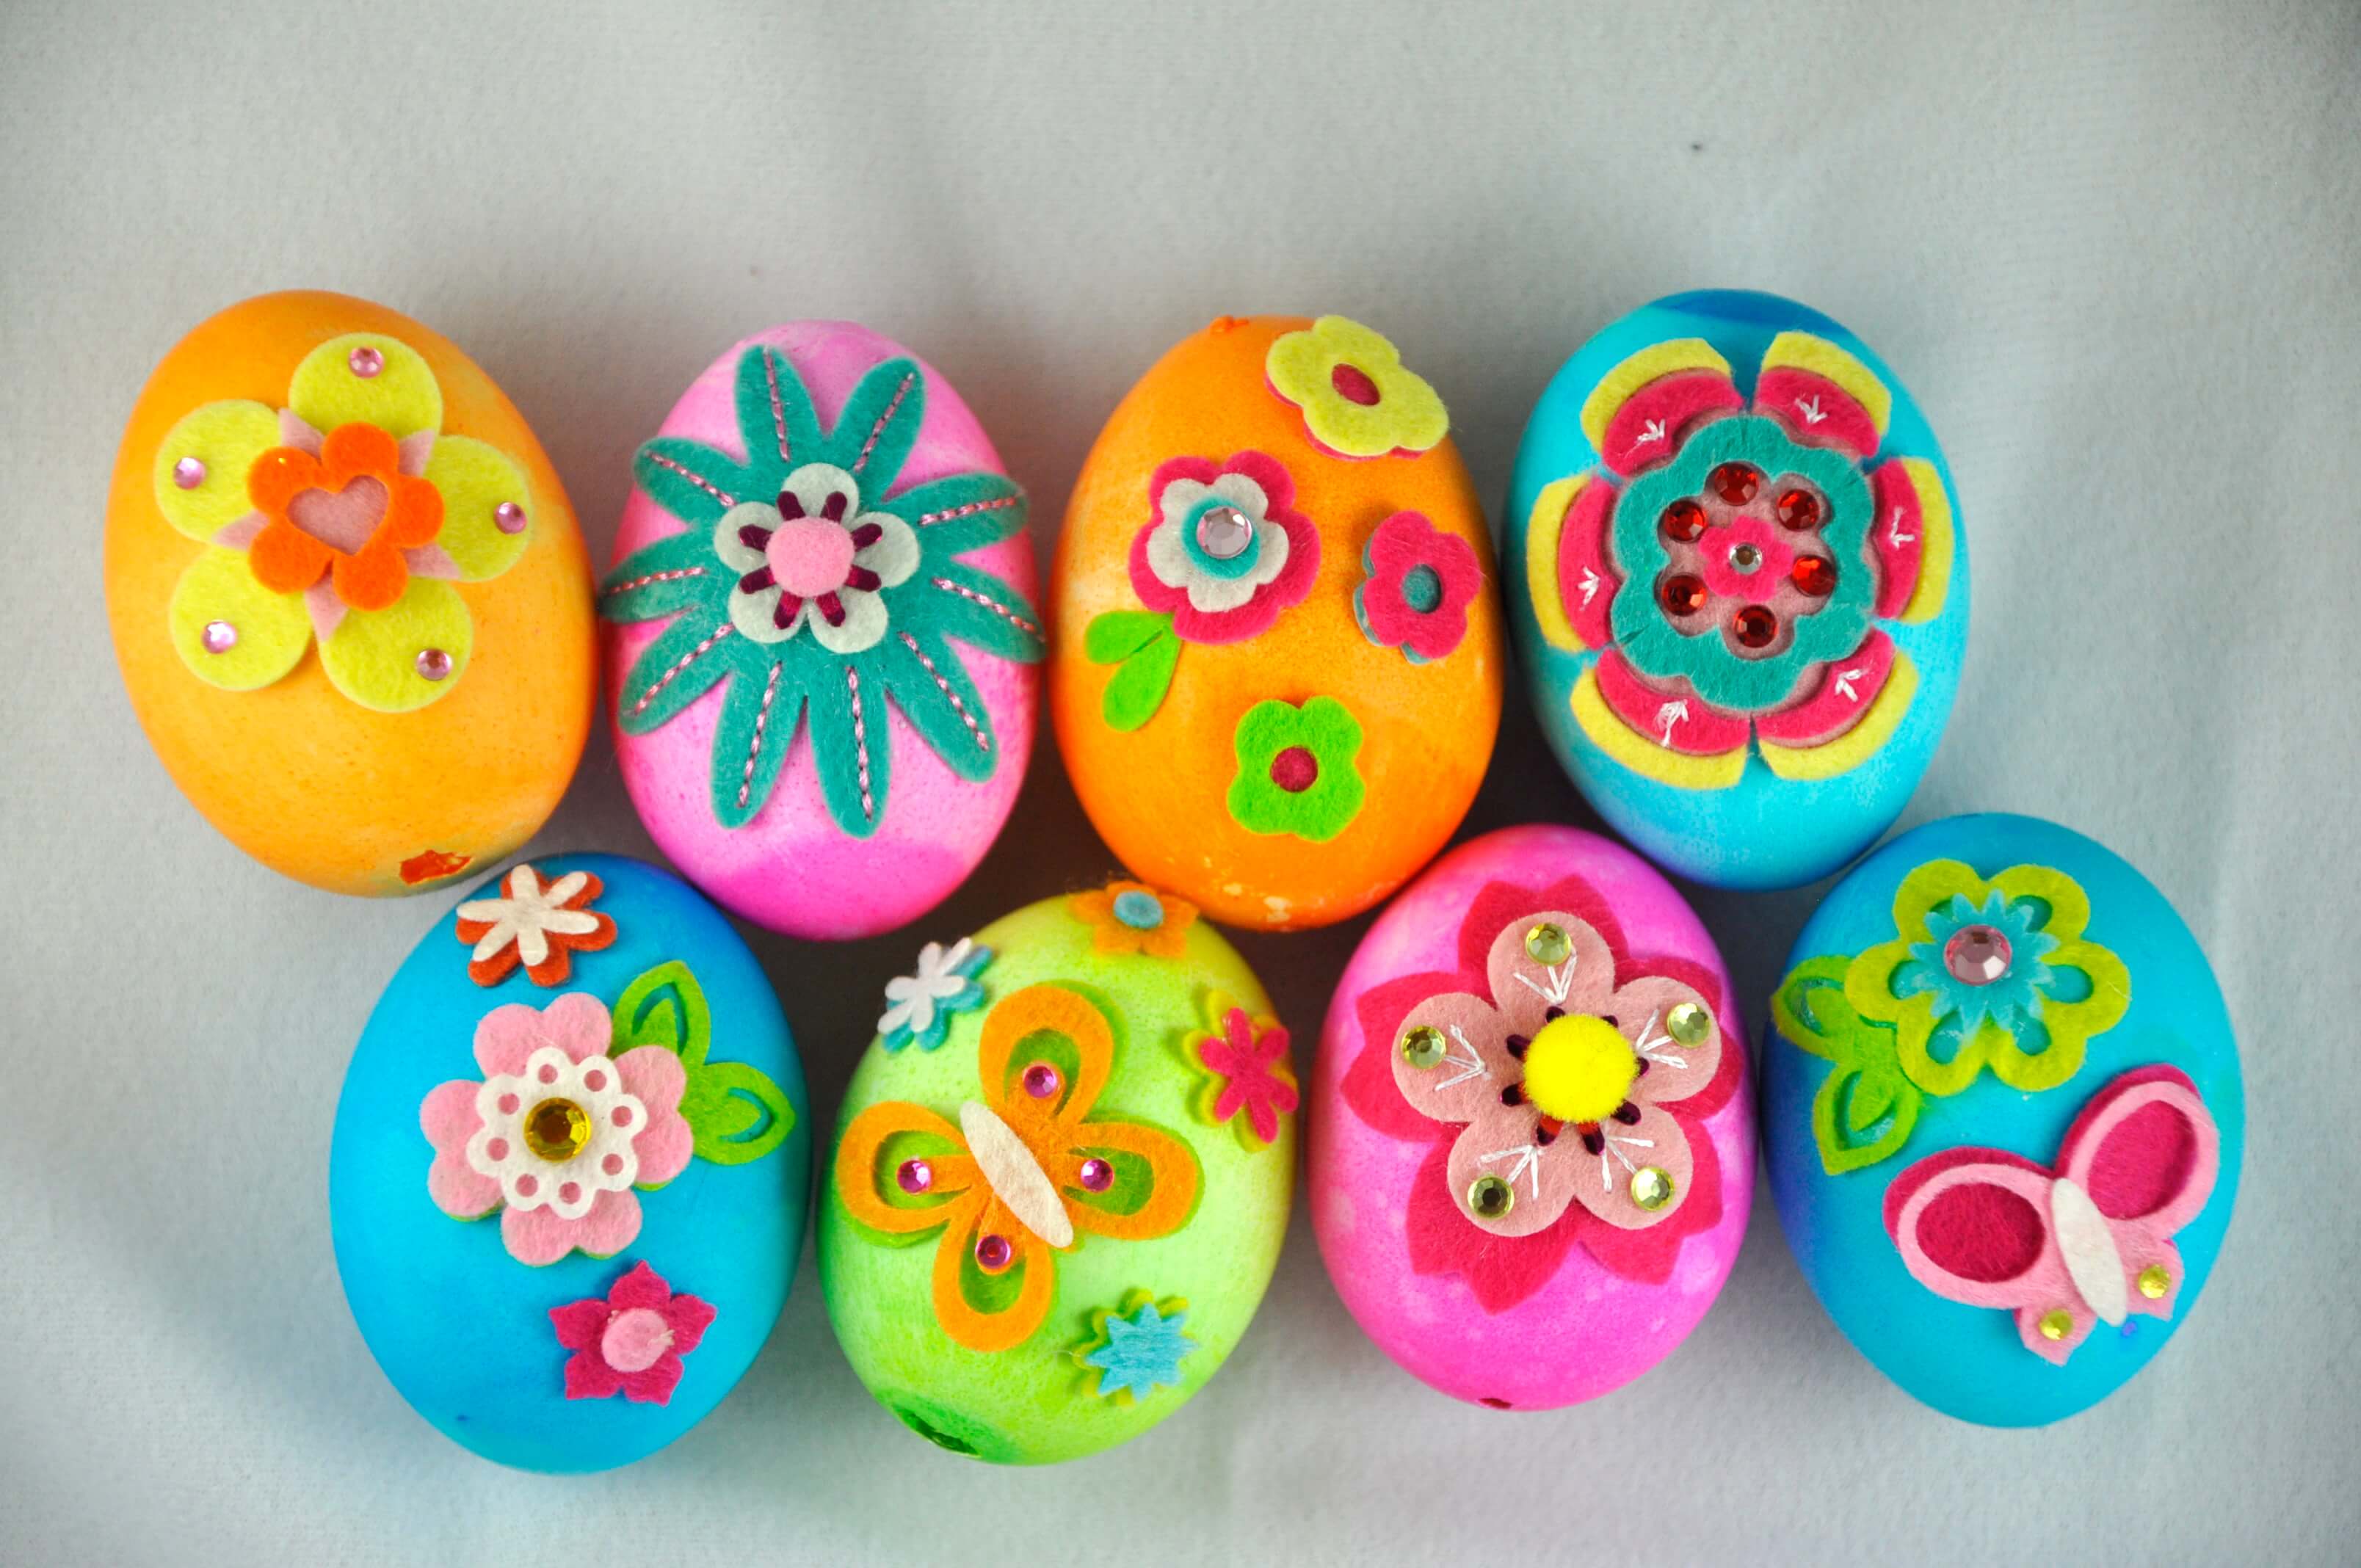 Colorful painting options for outdoor egg hunts